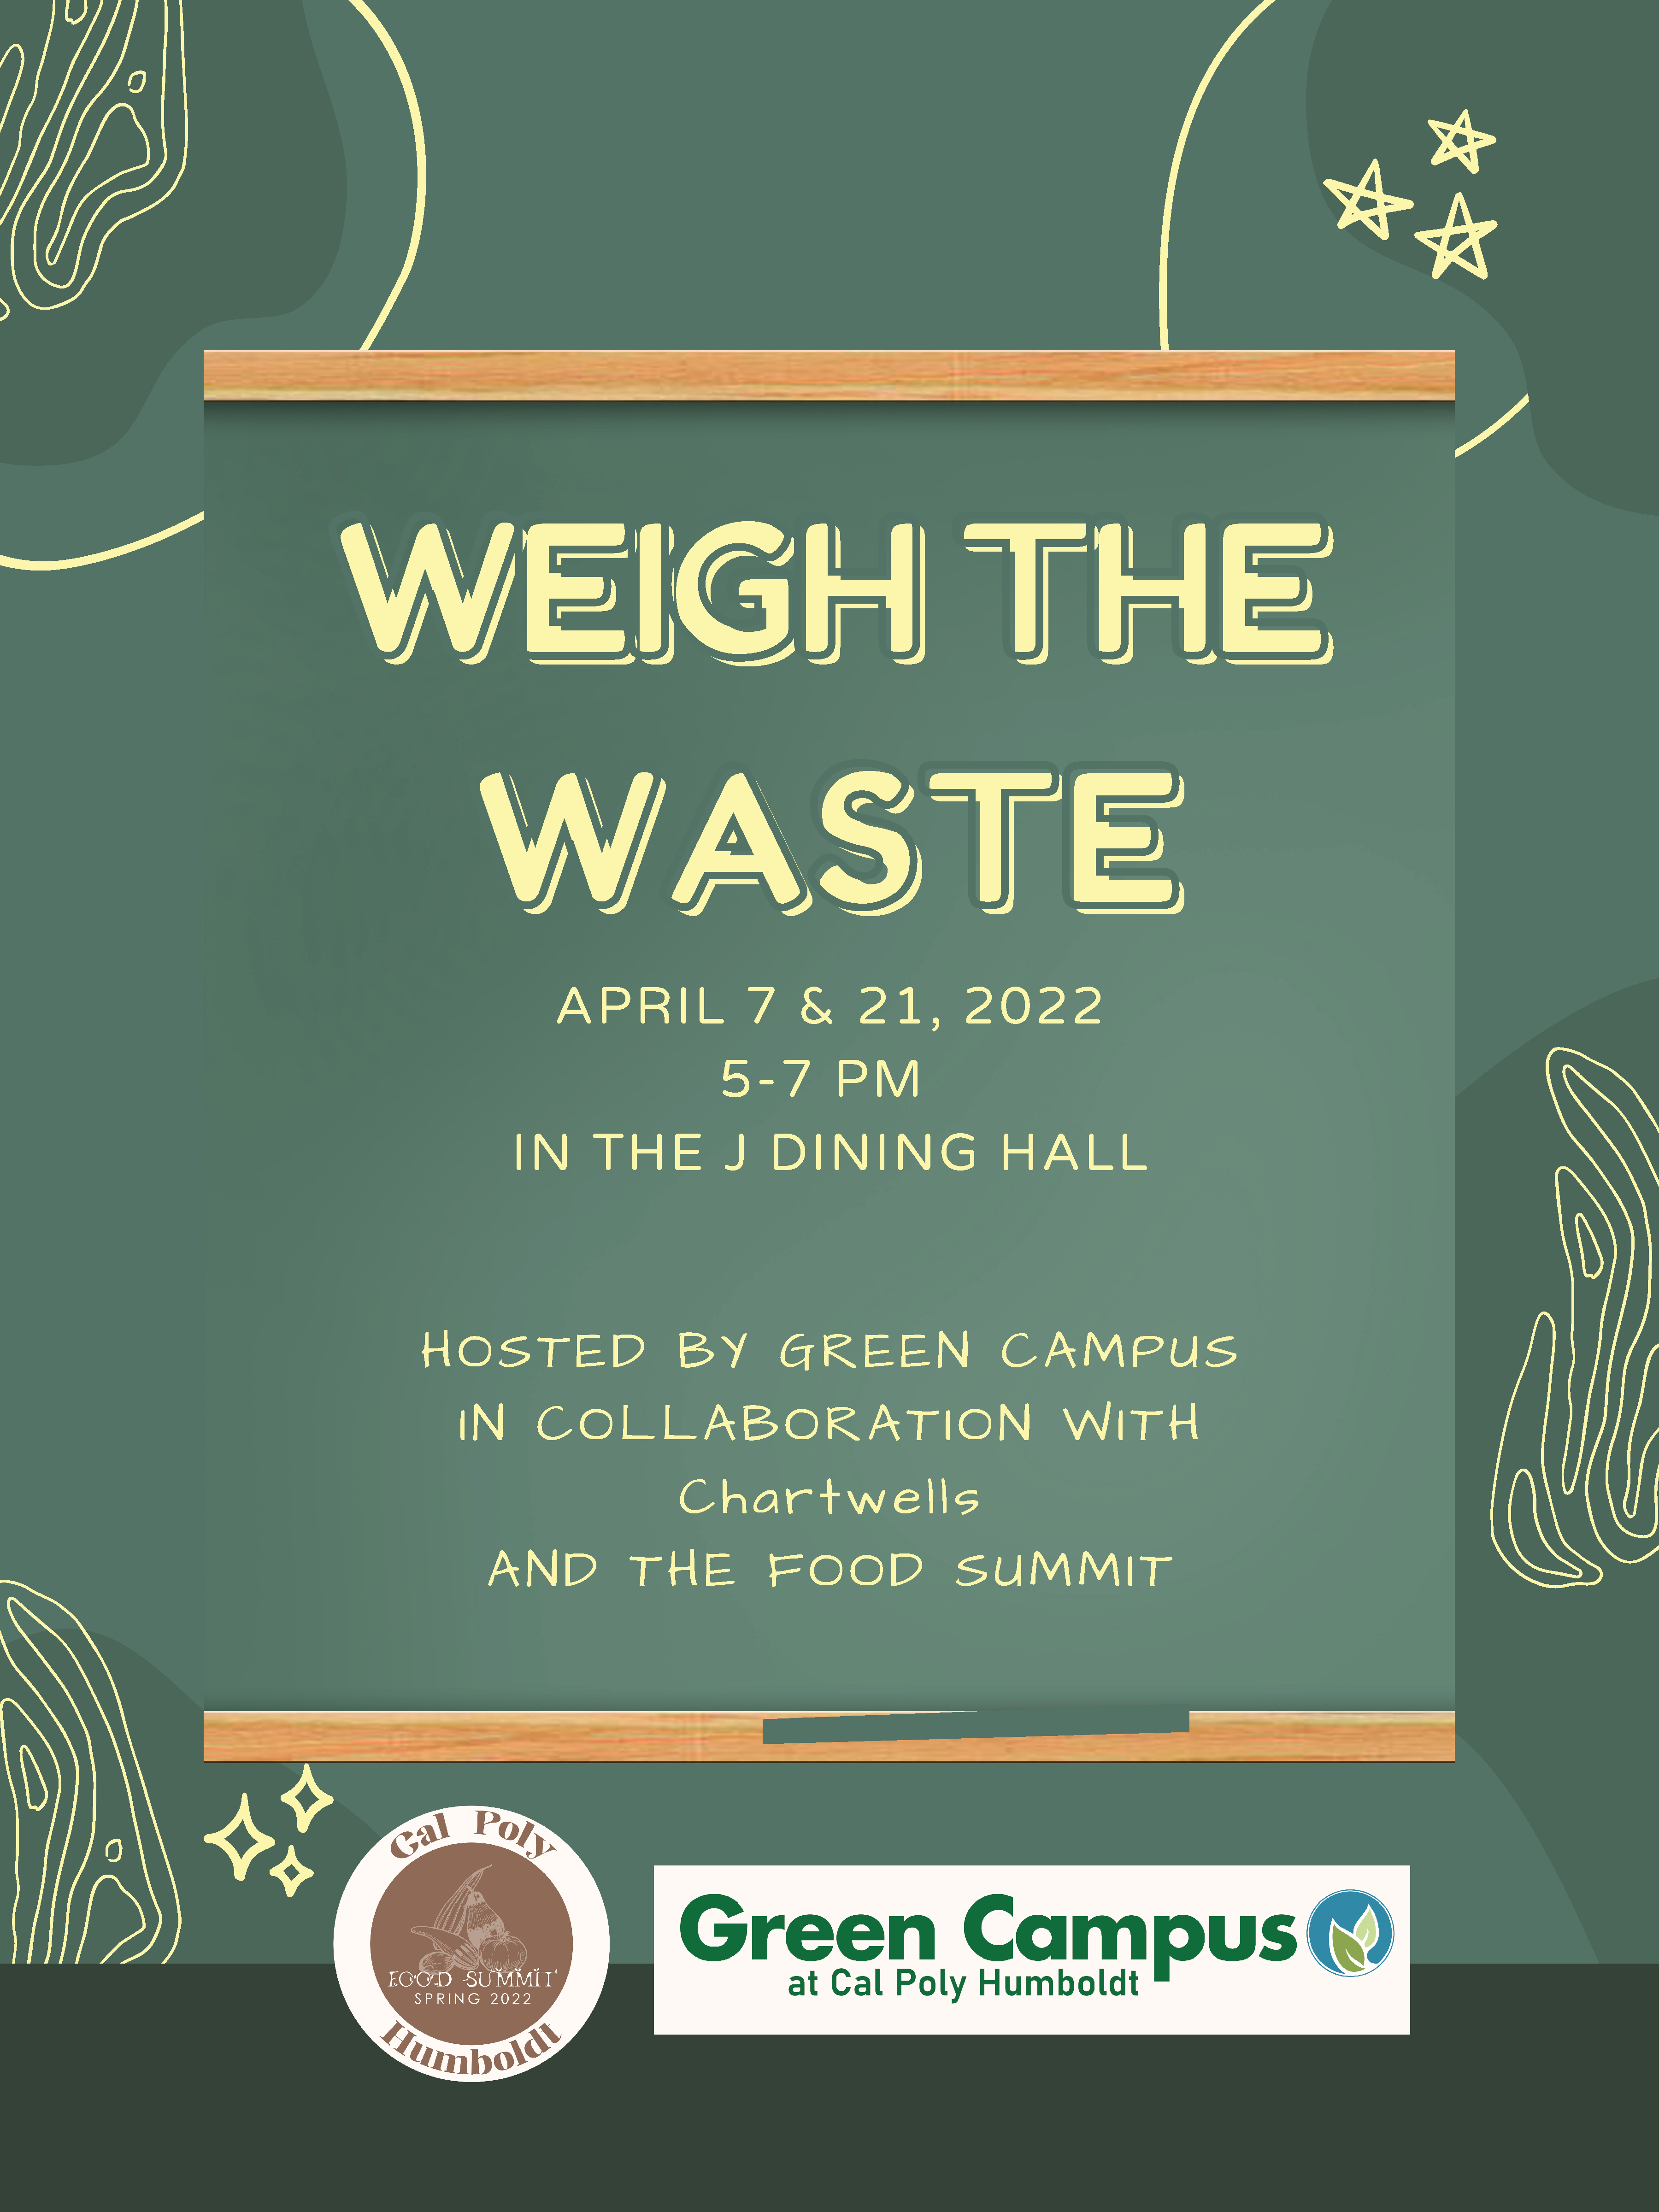 Weigh the Waste Event April 7th 5-7pm J Dining Hall